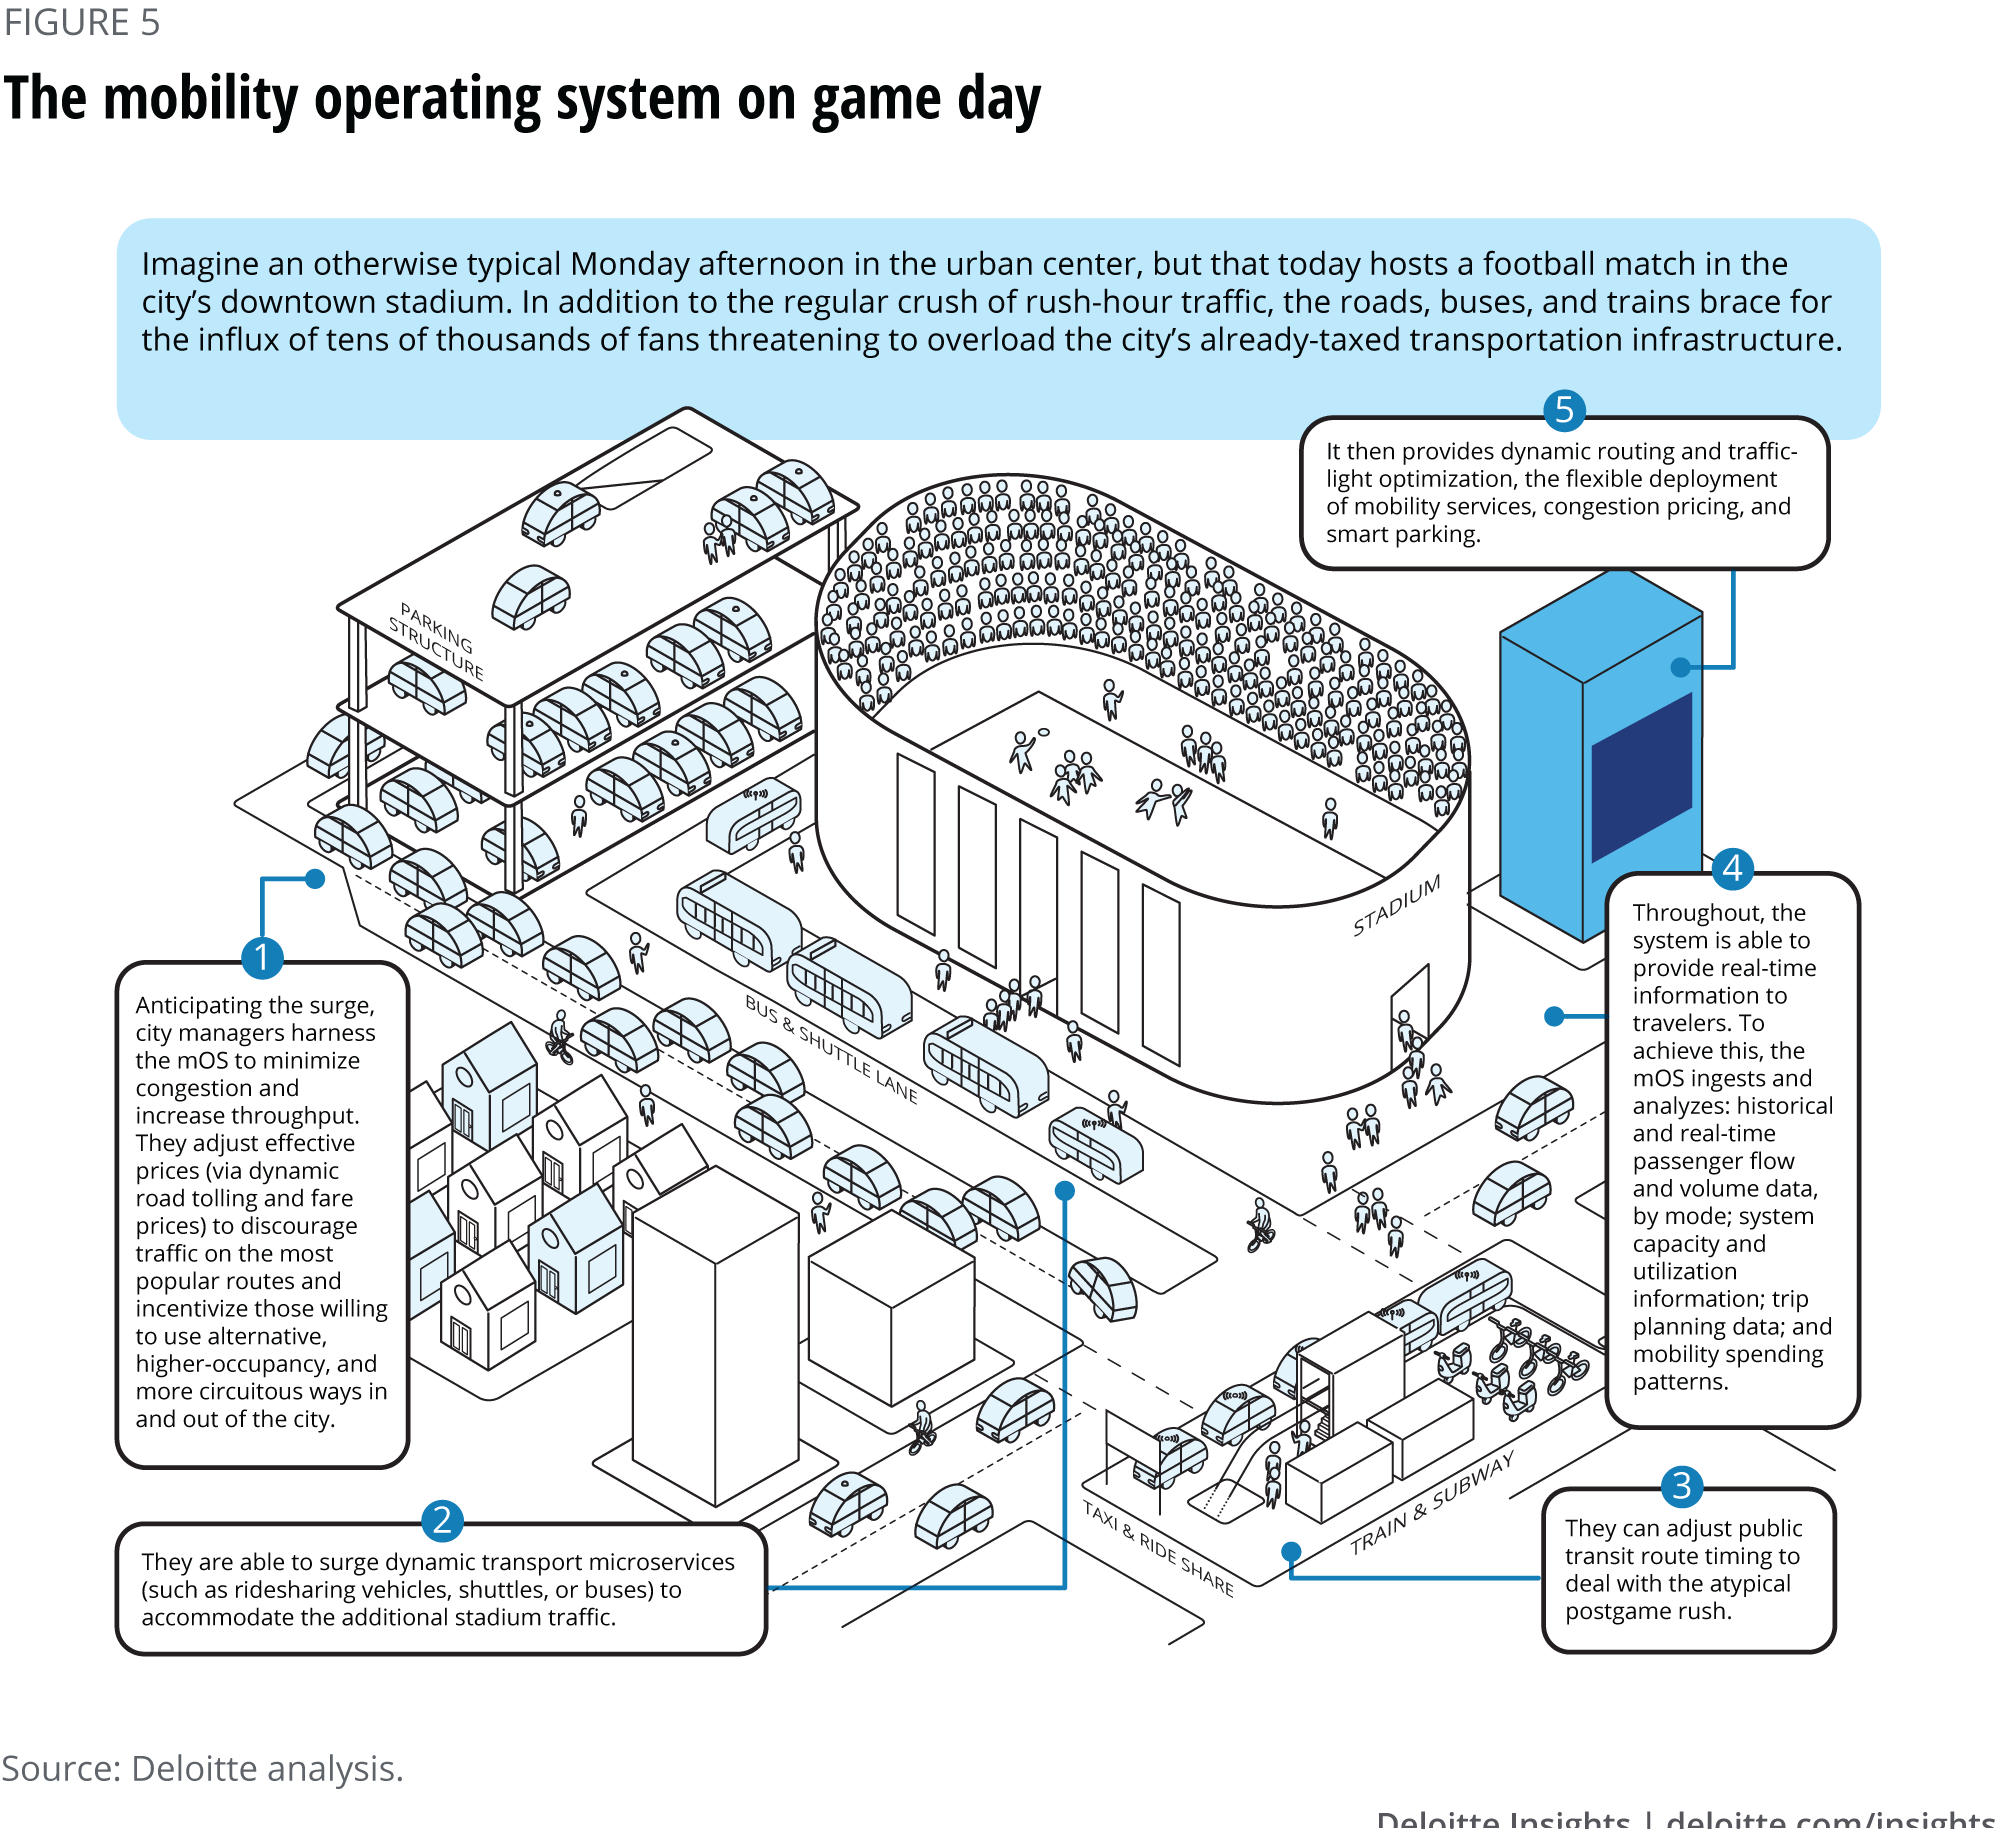 The mobility operating system on game day